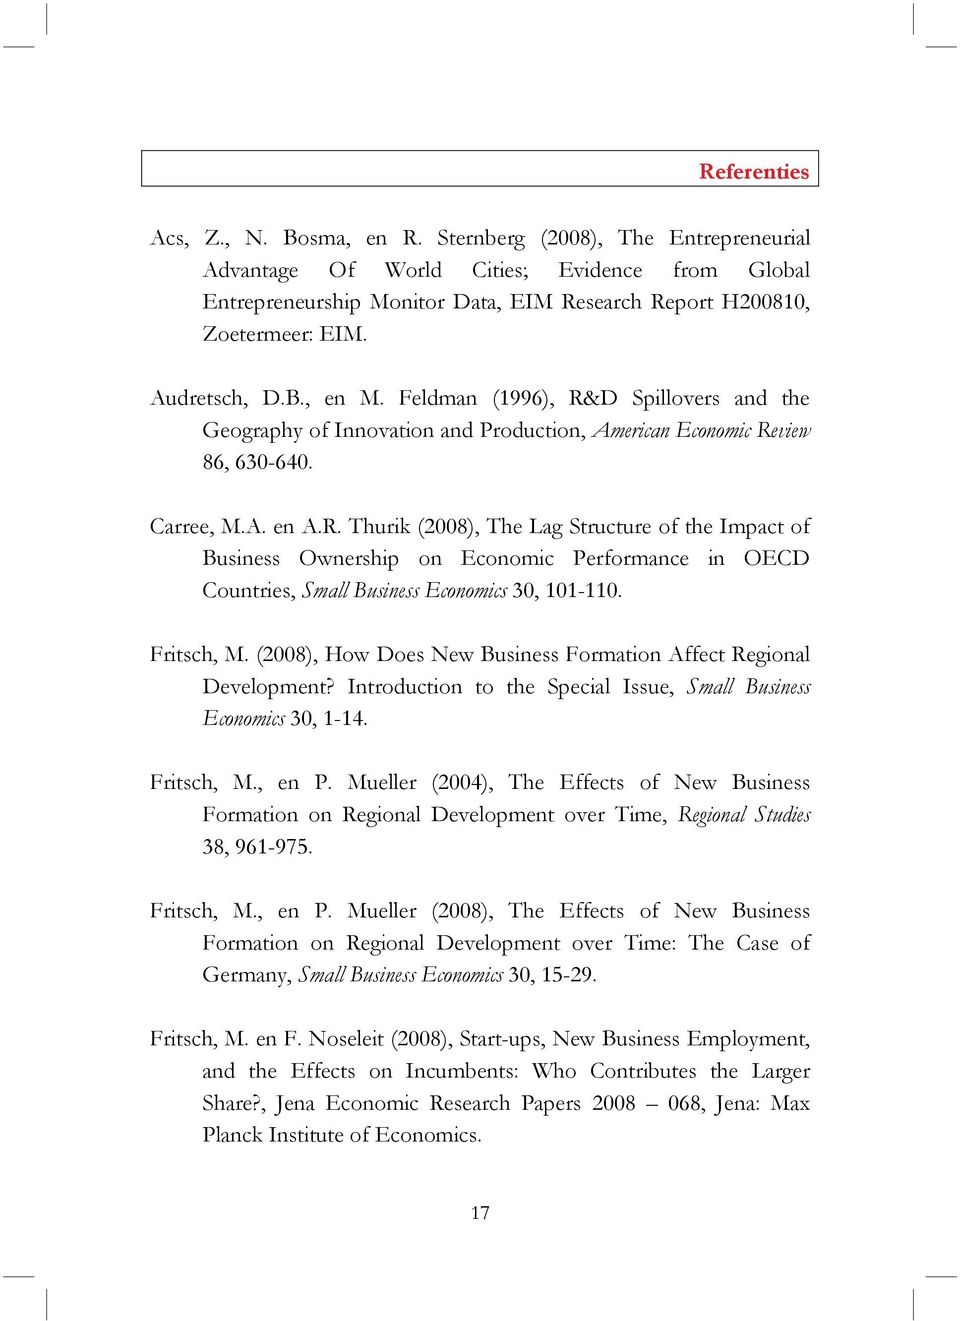 Fritsch, M. (2008), How Does New Business Formation Affect Regional Development? Introduction to the Special Issue, Small Business Economics 30, 1-14. Fritsch, M., en P.